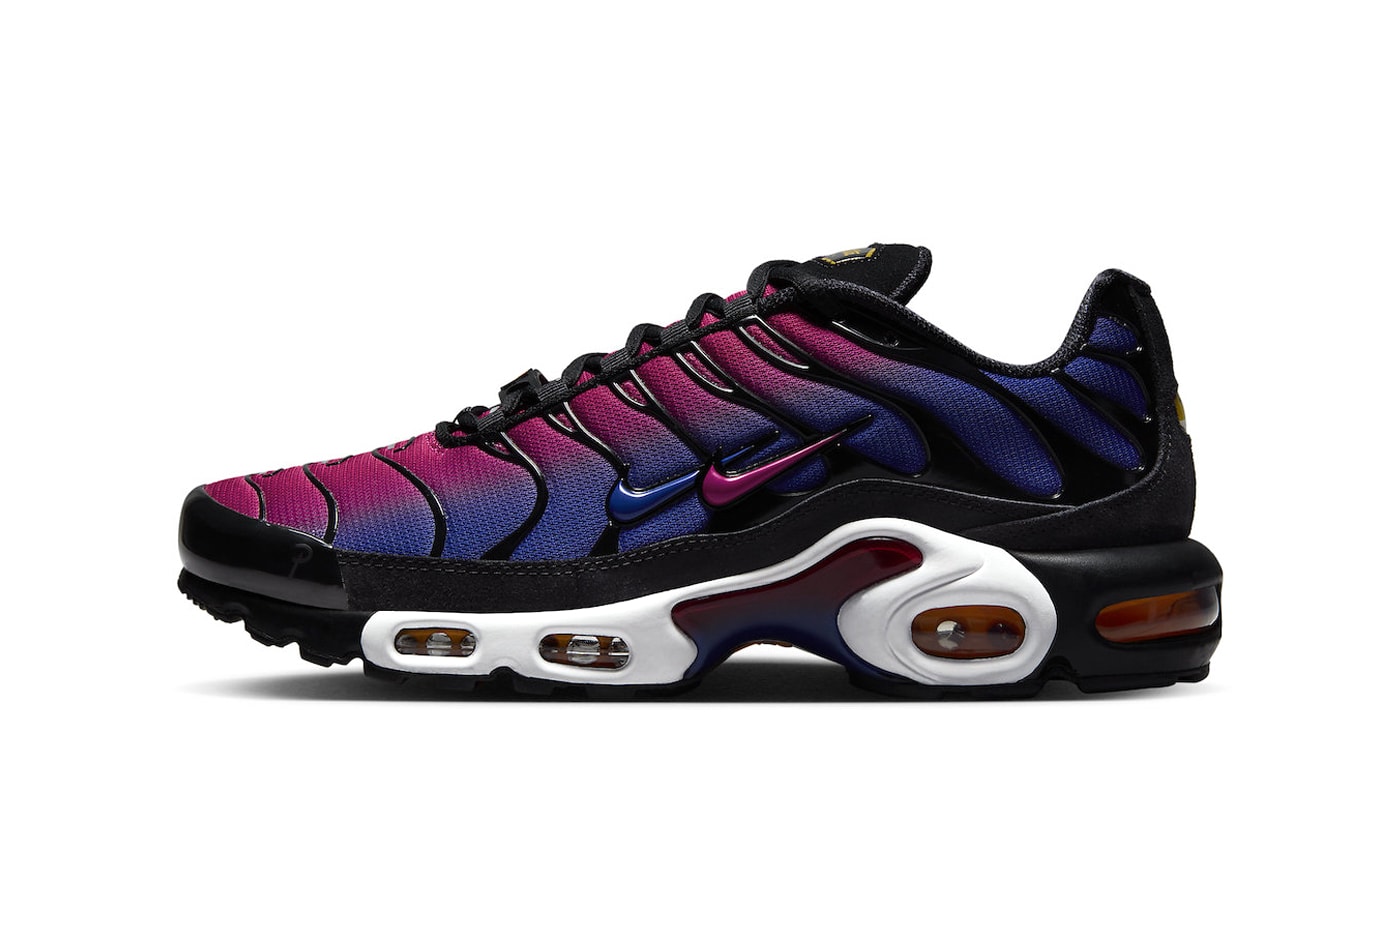 Patta x Nike Air Max Plus "FC Barcelona" Holiday Release | Hypebeast